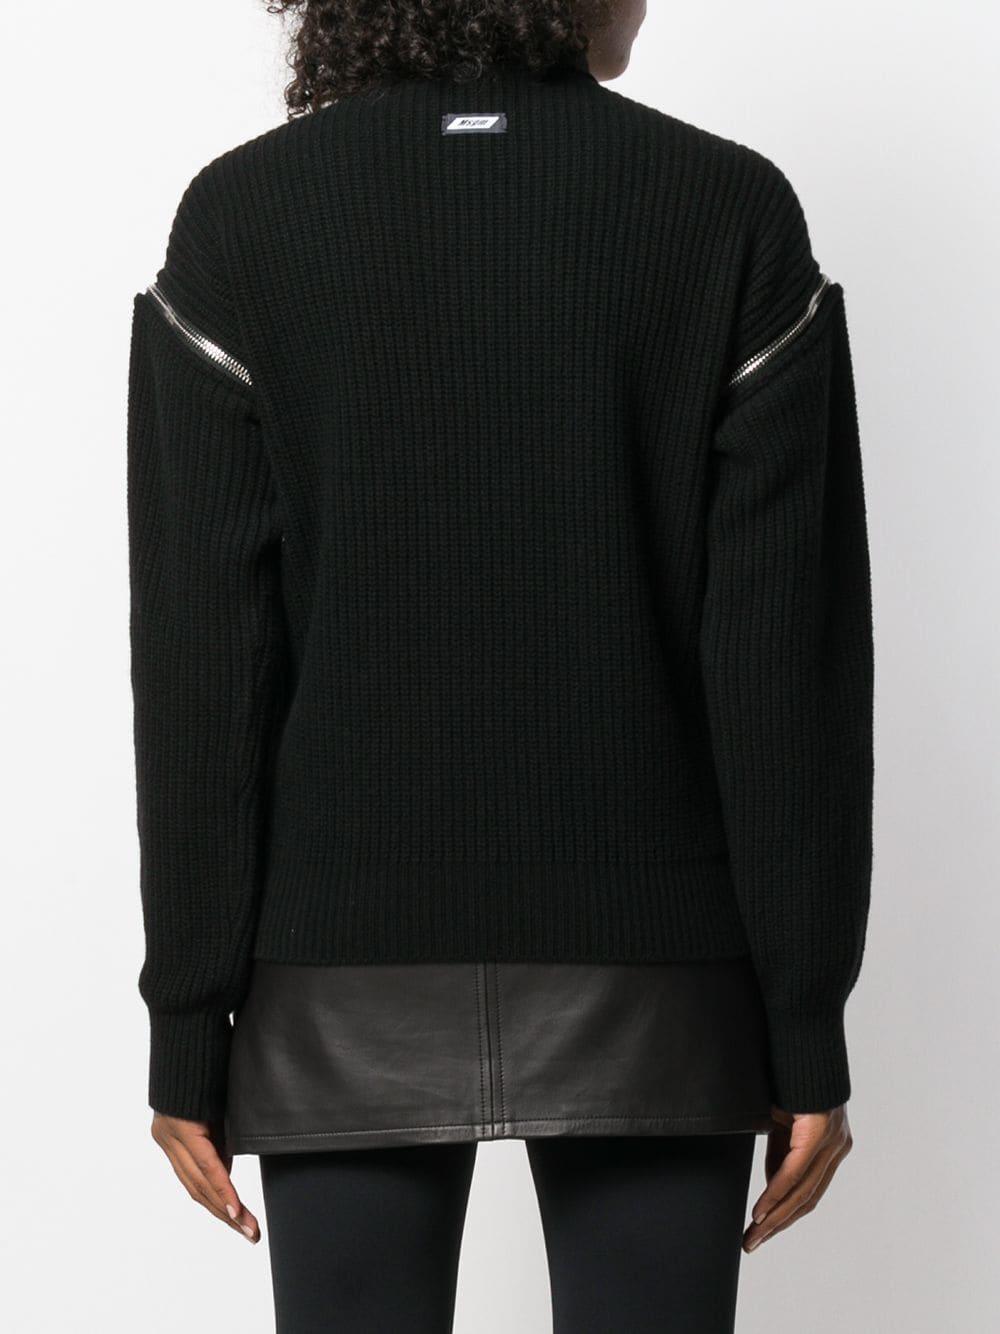 MSGM Wool Turtleneck Knitted Sweater in Black - Lyst